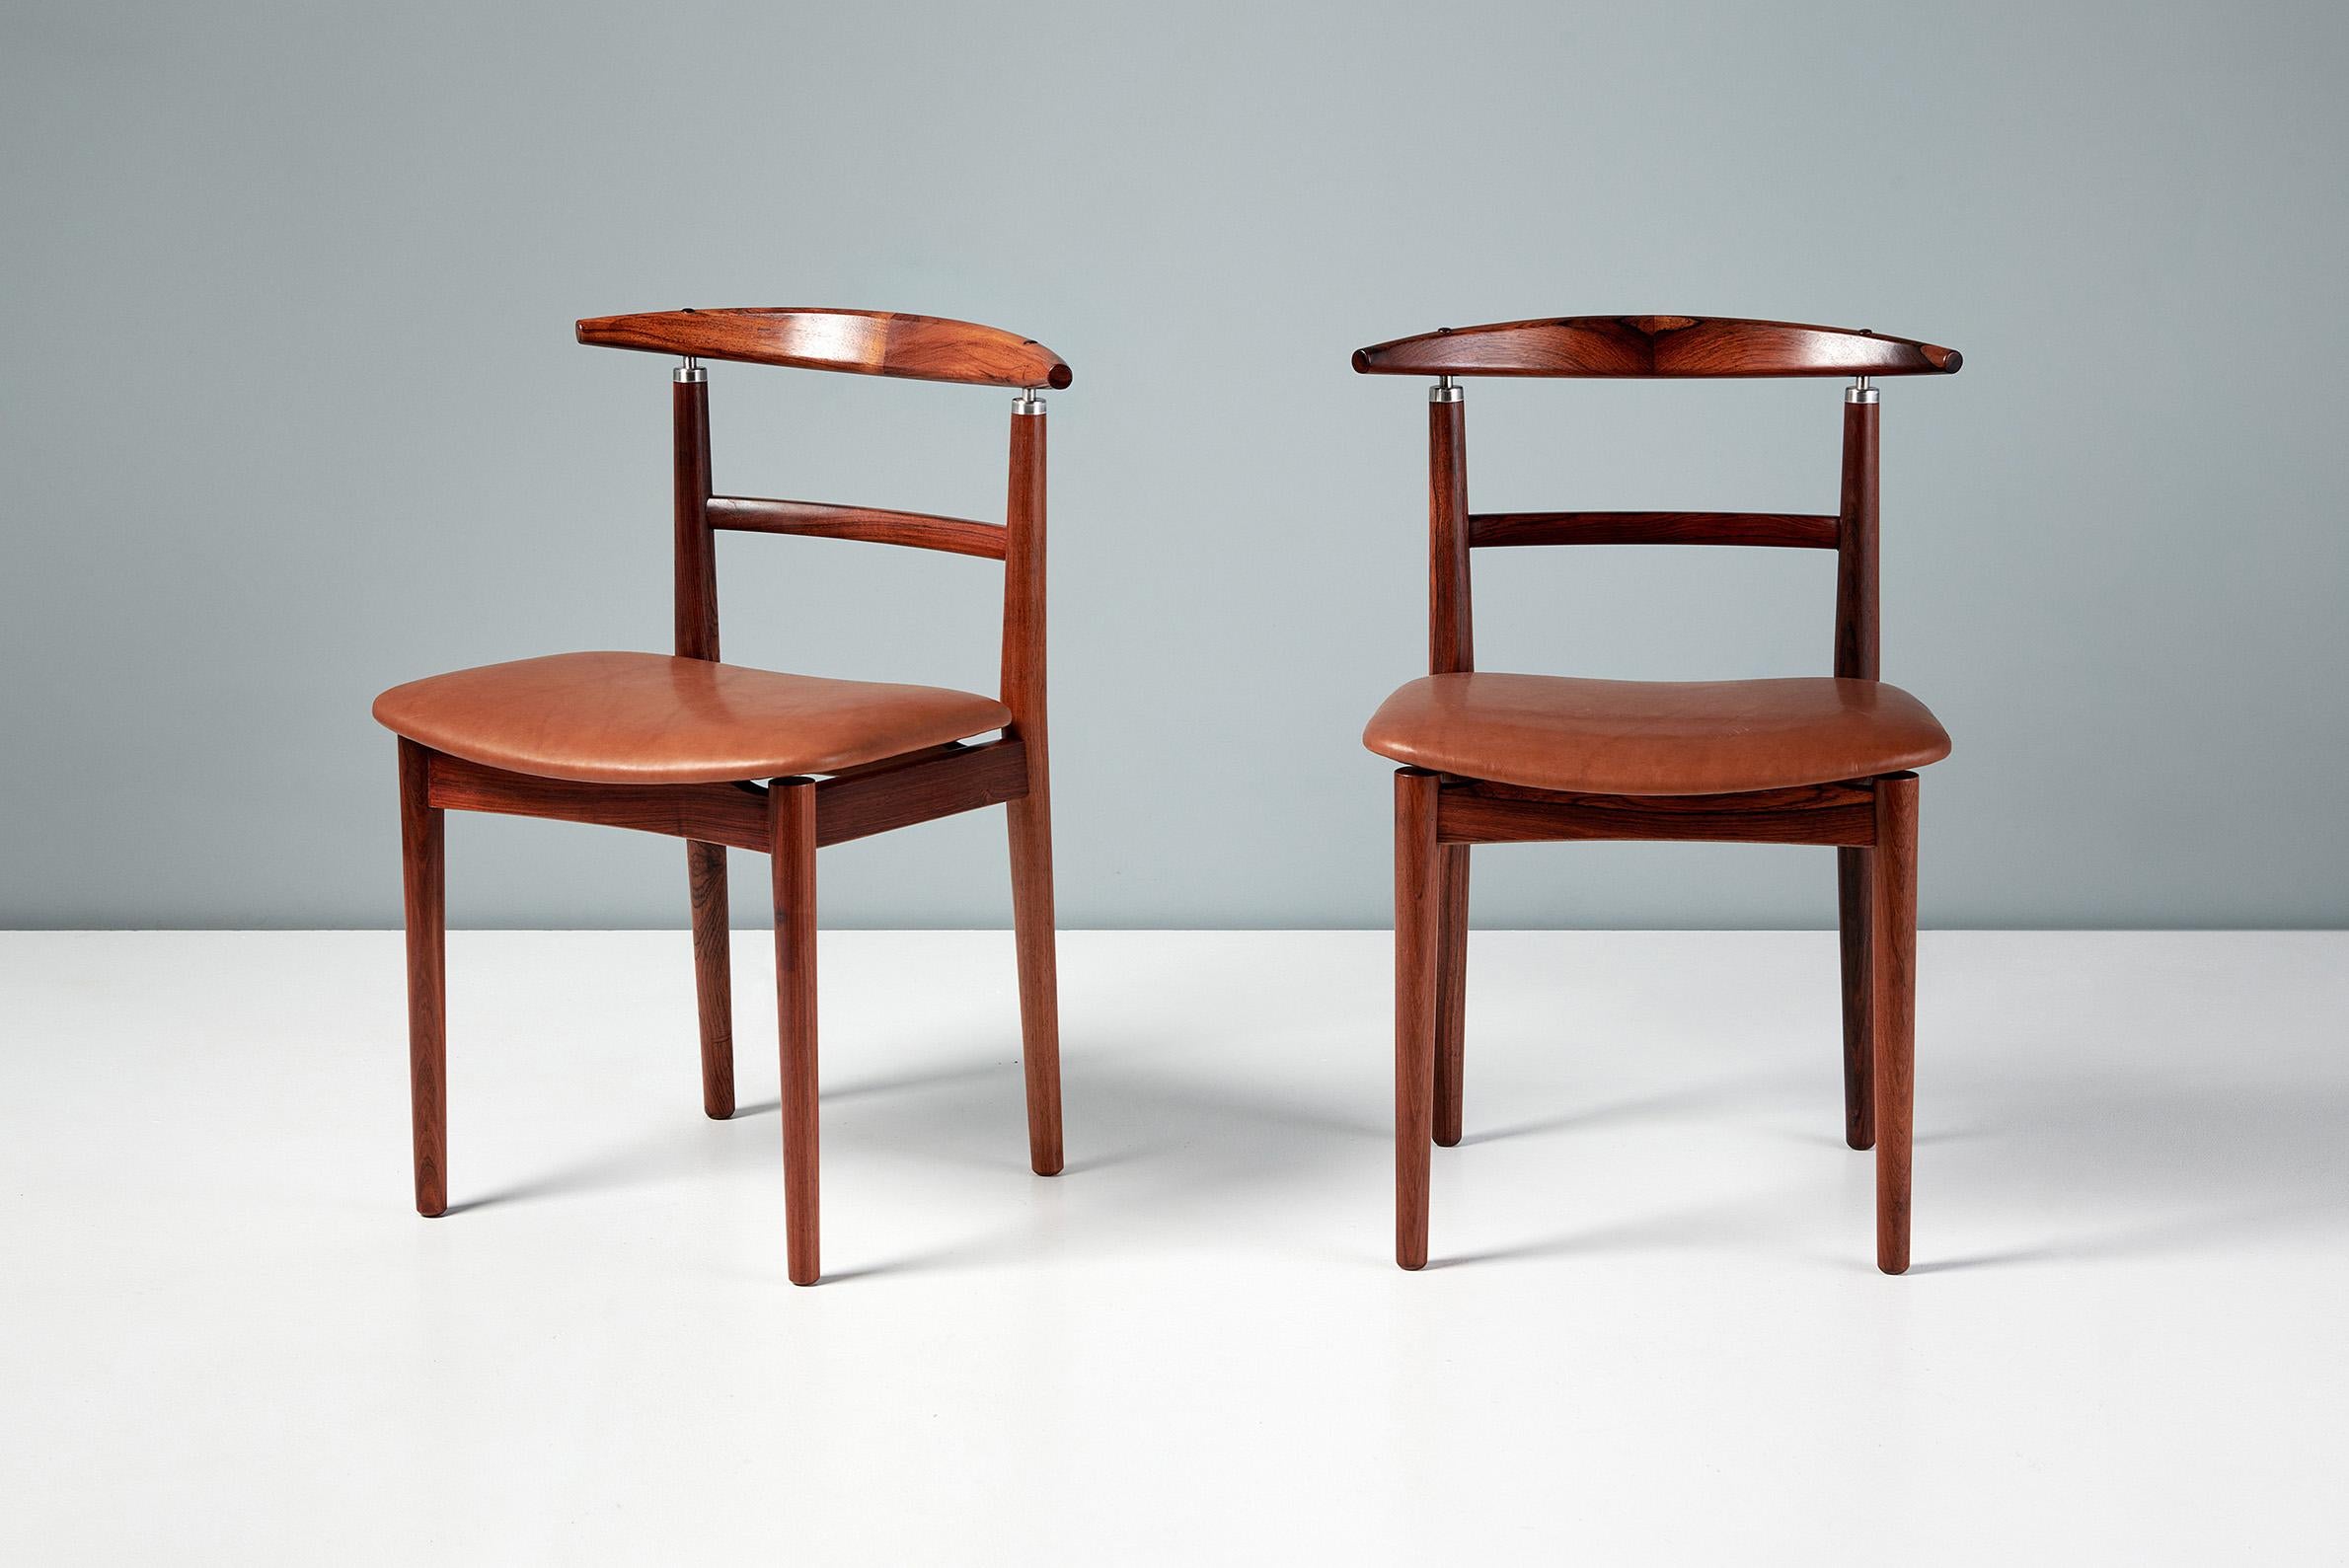 Borge Rammeskov Set of 8 Danish Rosewood Dining Chairs, c1960s For Sale 3